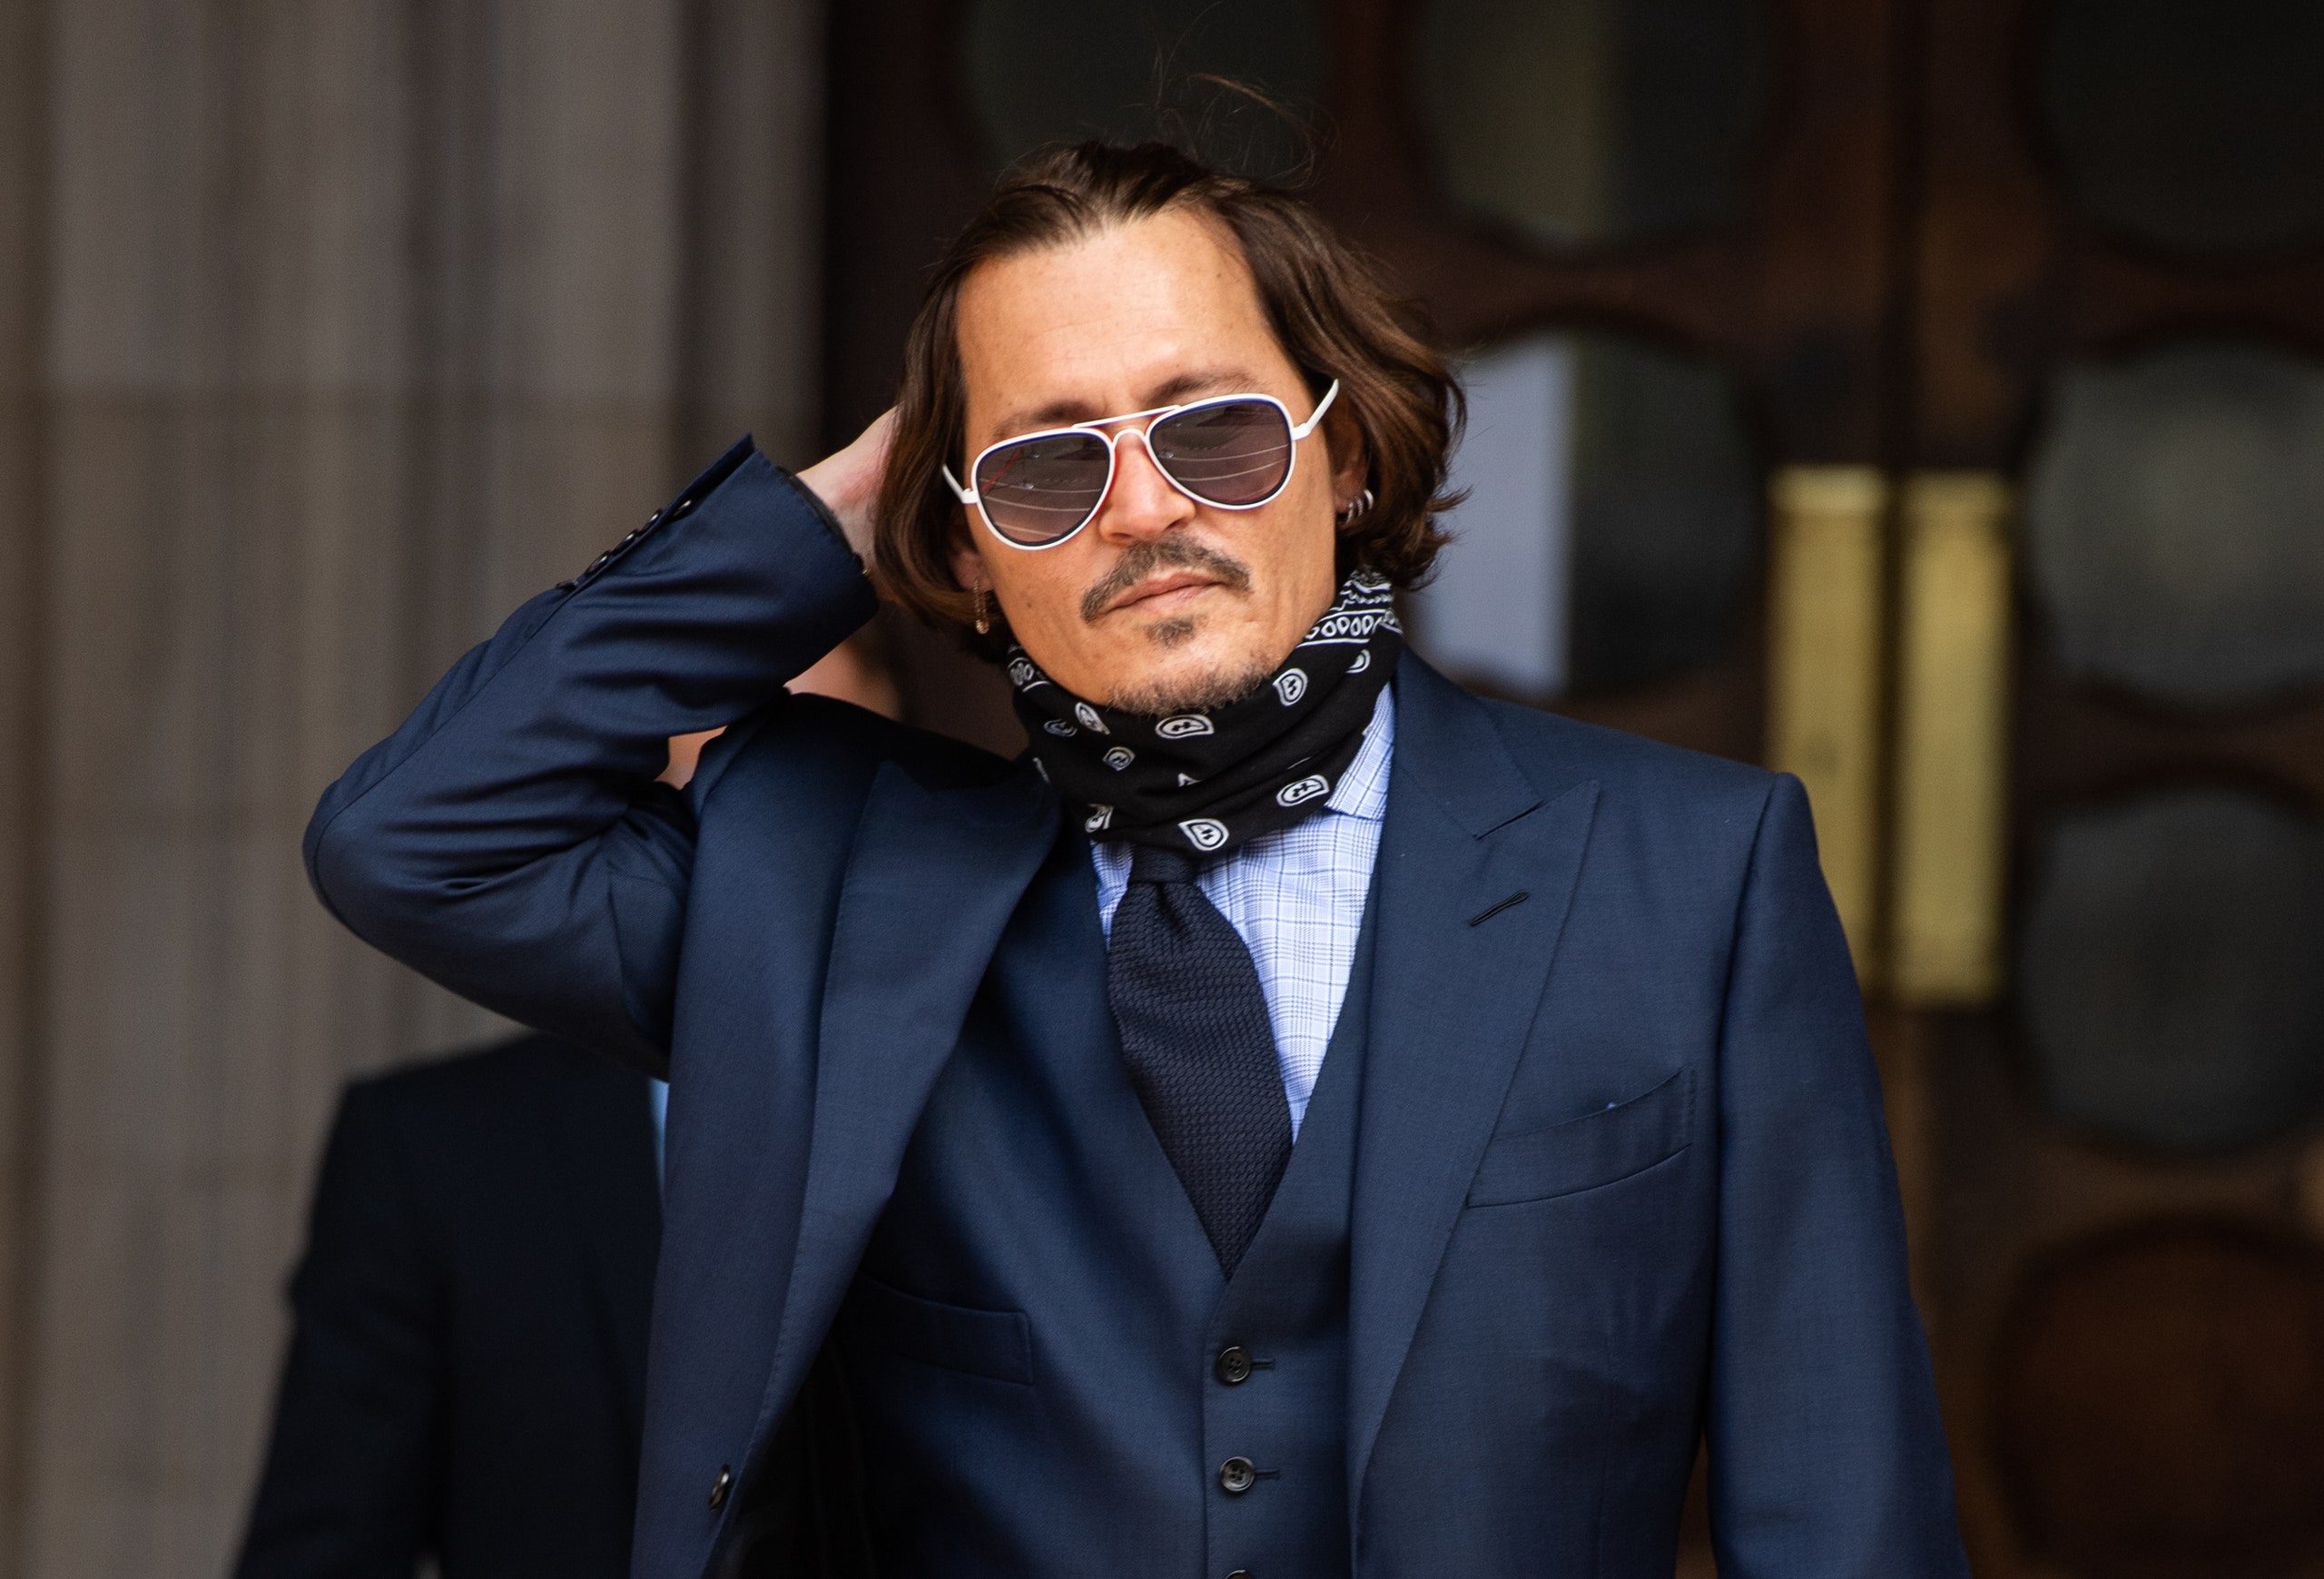 johnny depp claims being boycotted by hollywood